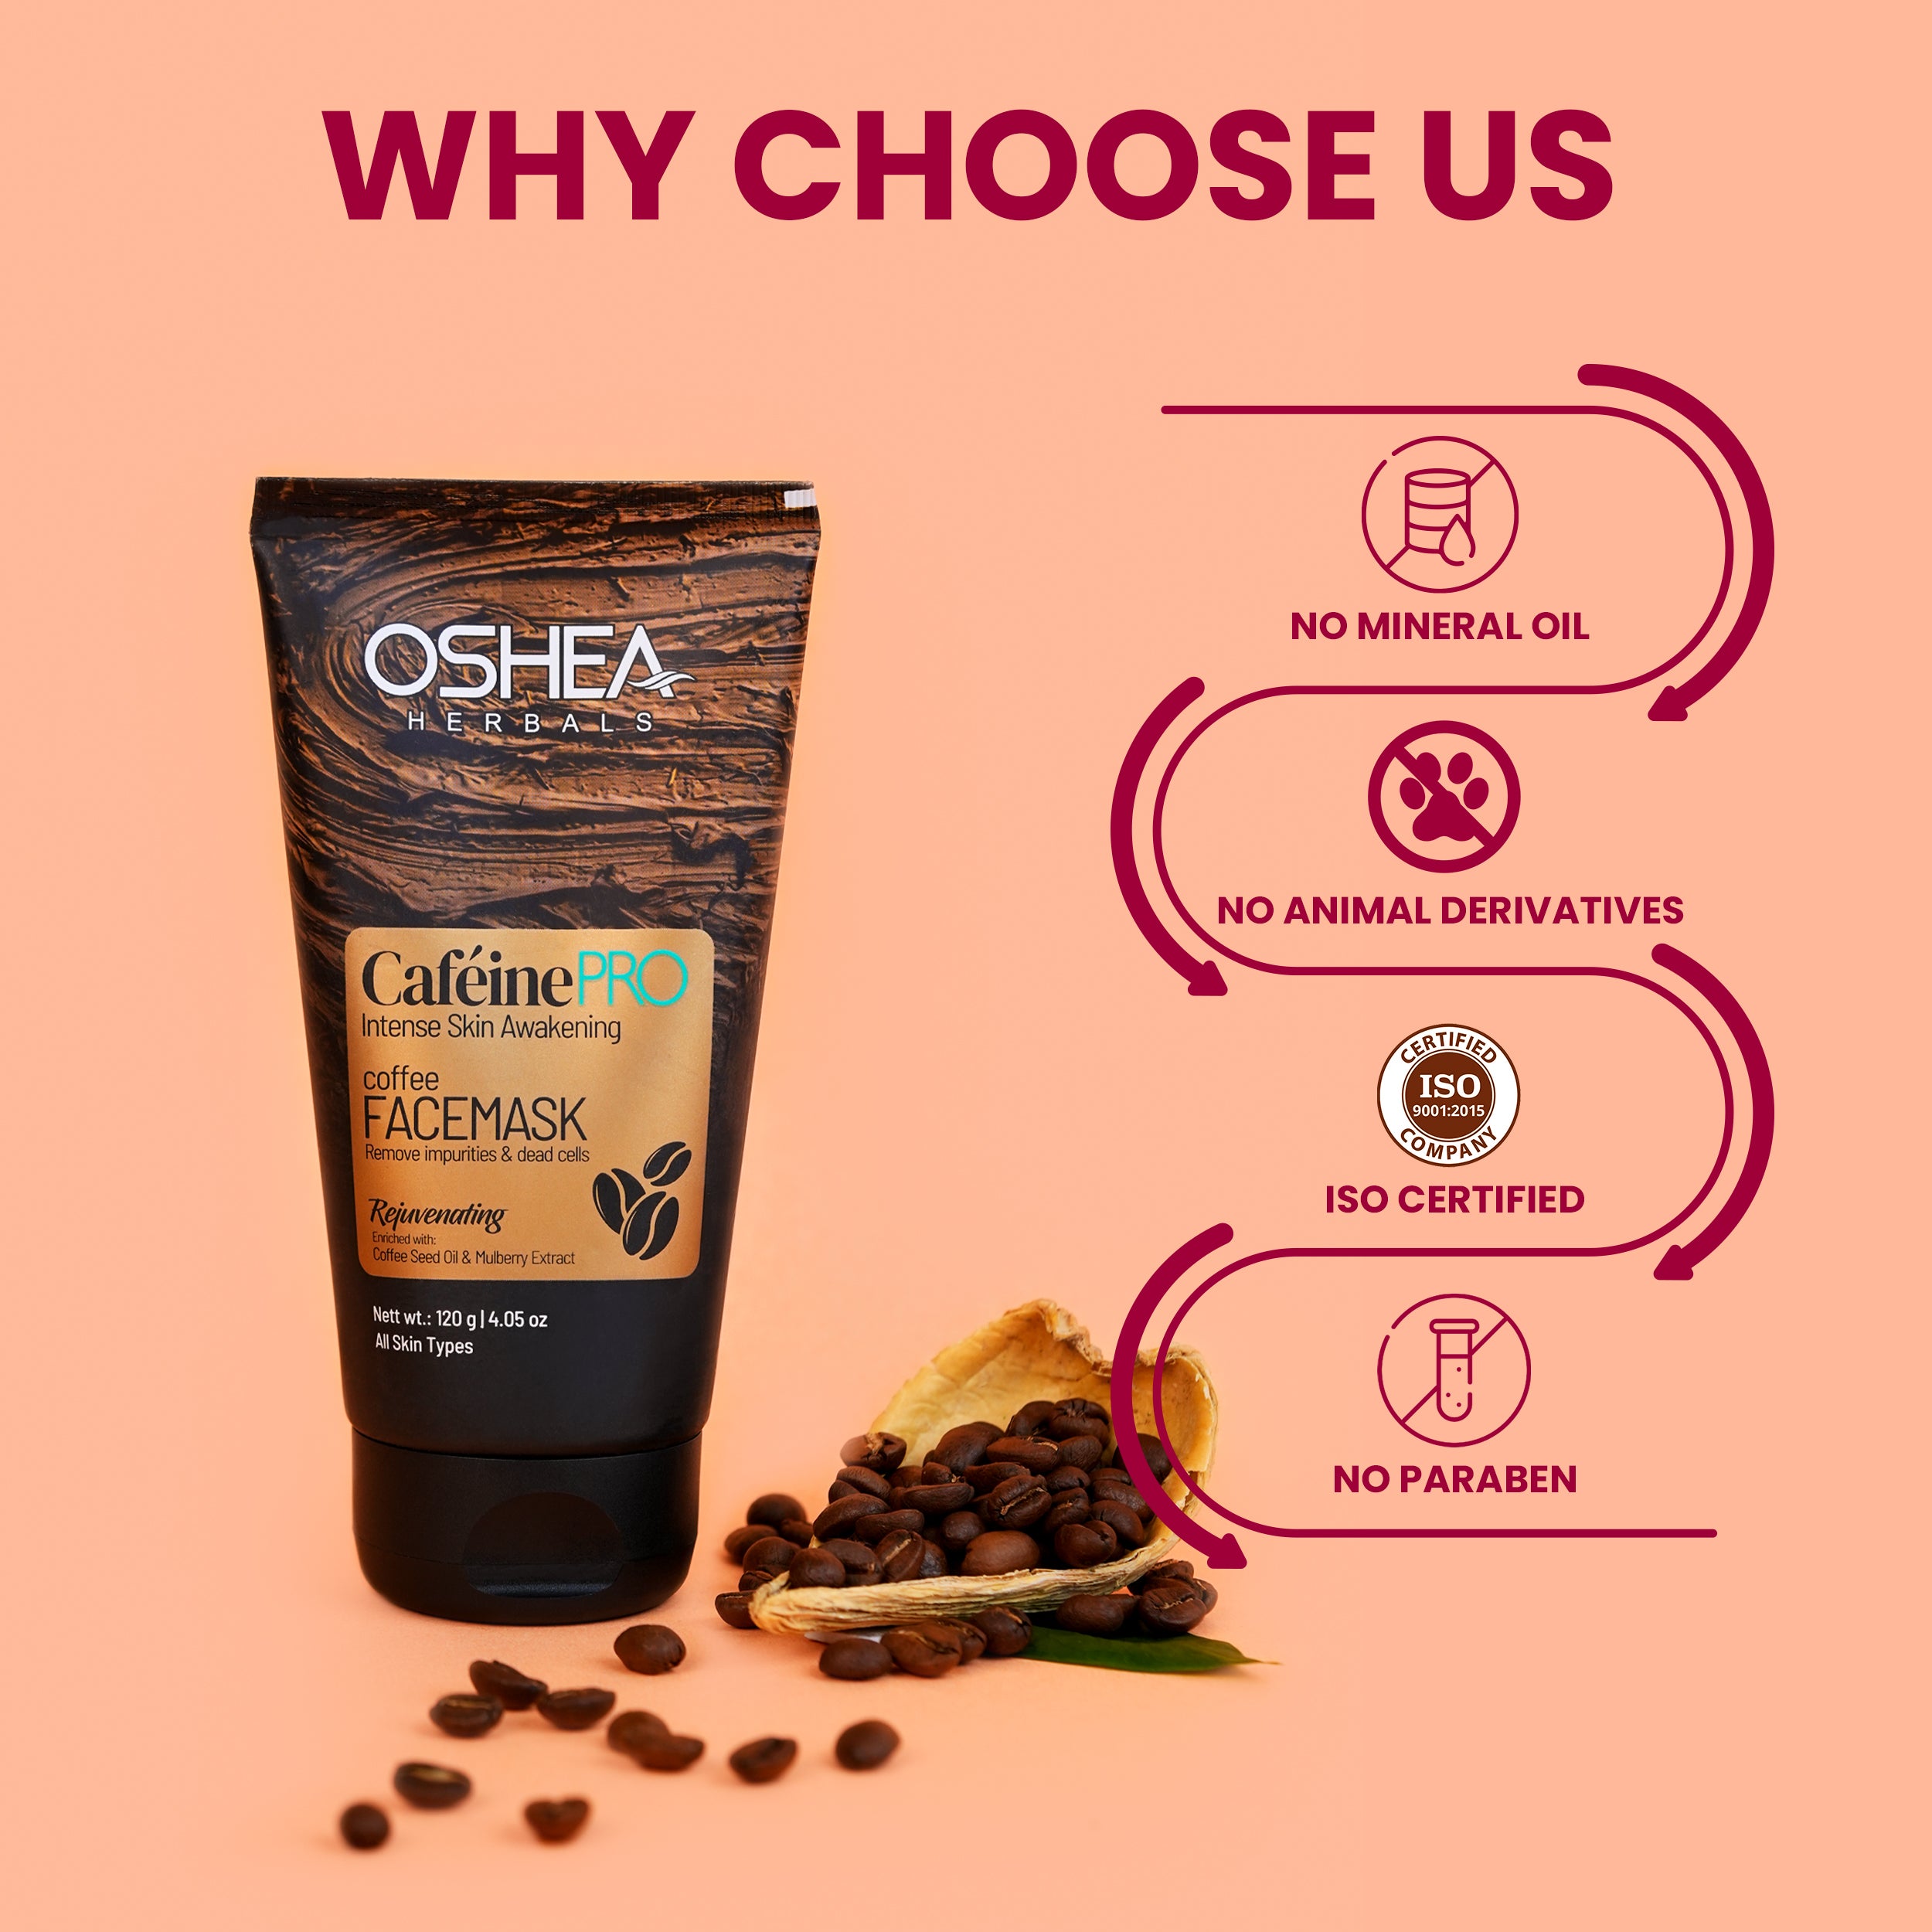 Why choose us Cafeine-Pro Face Mask Oshea Herbals